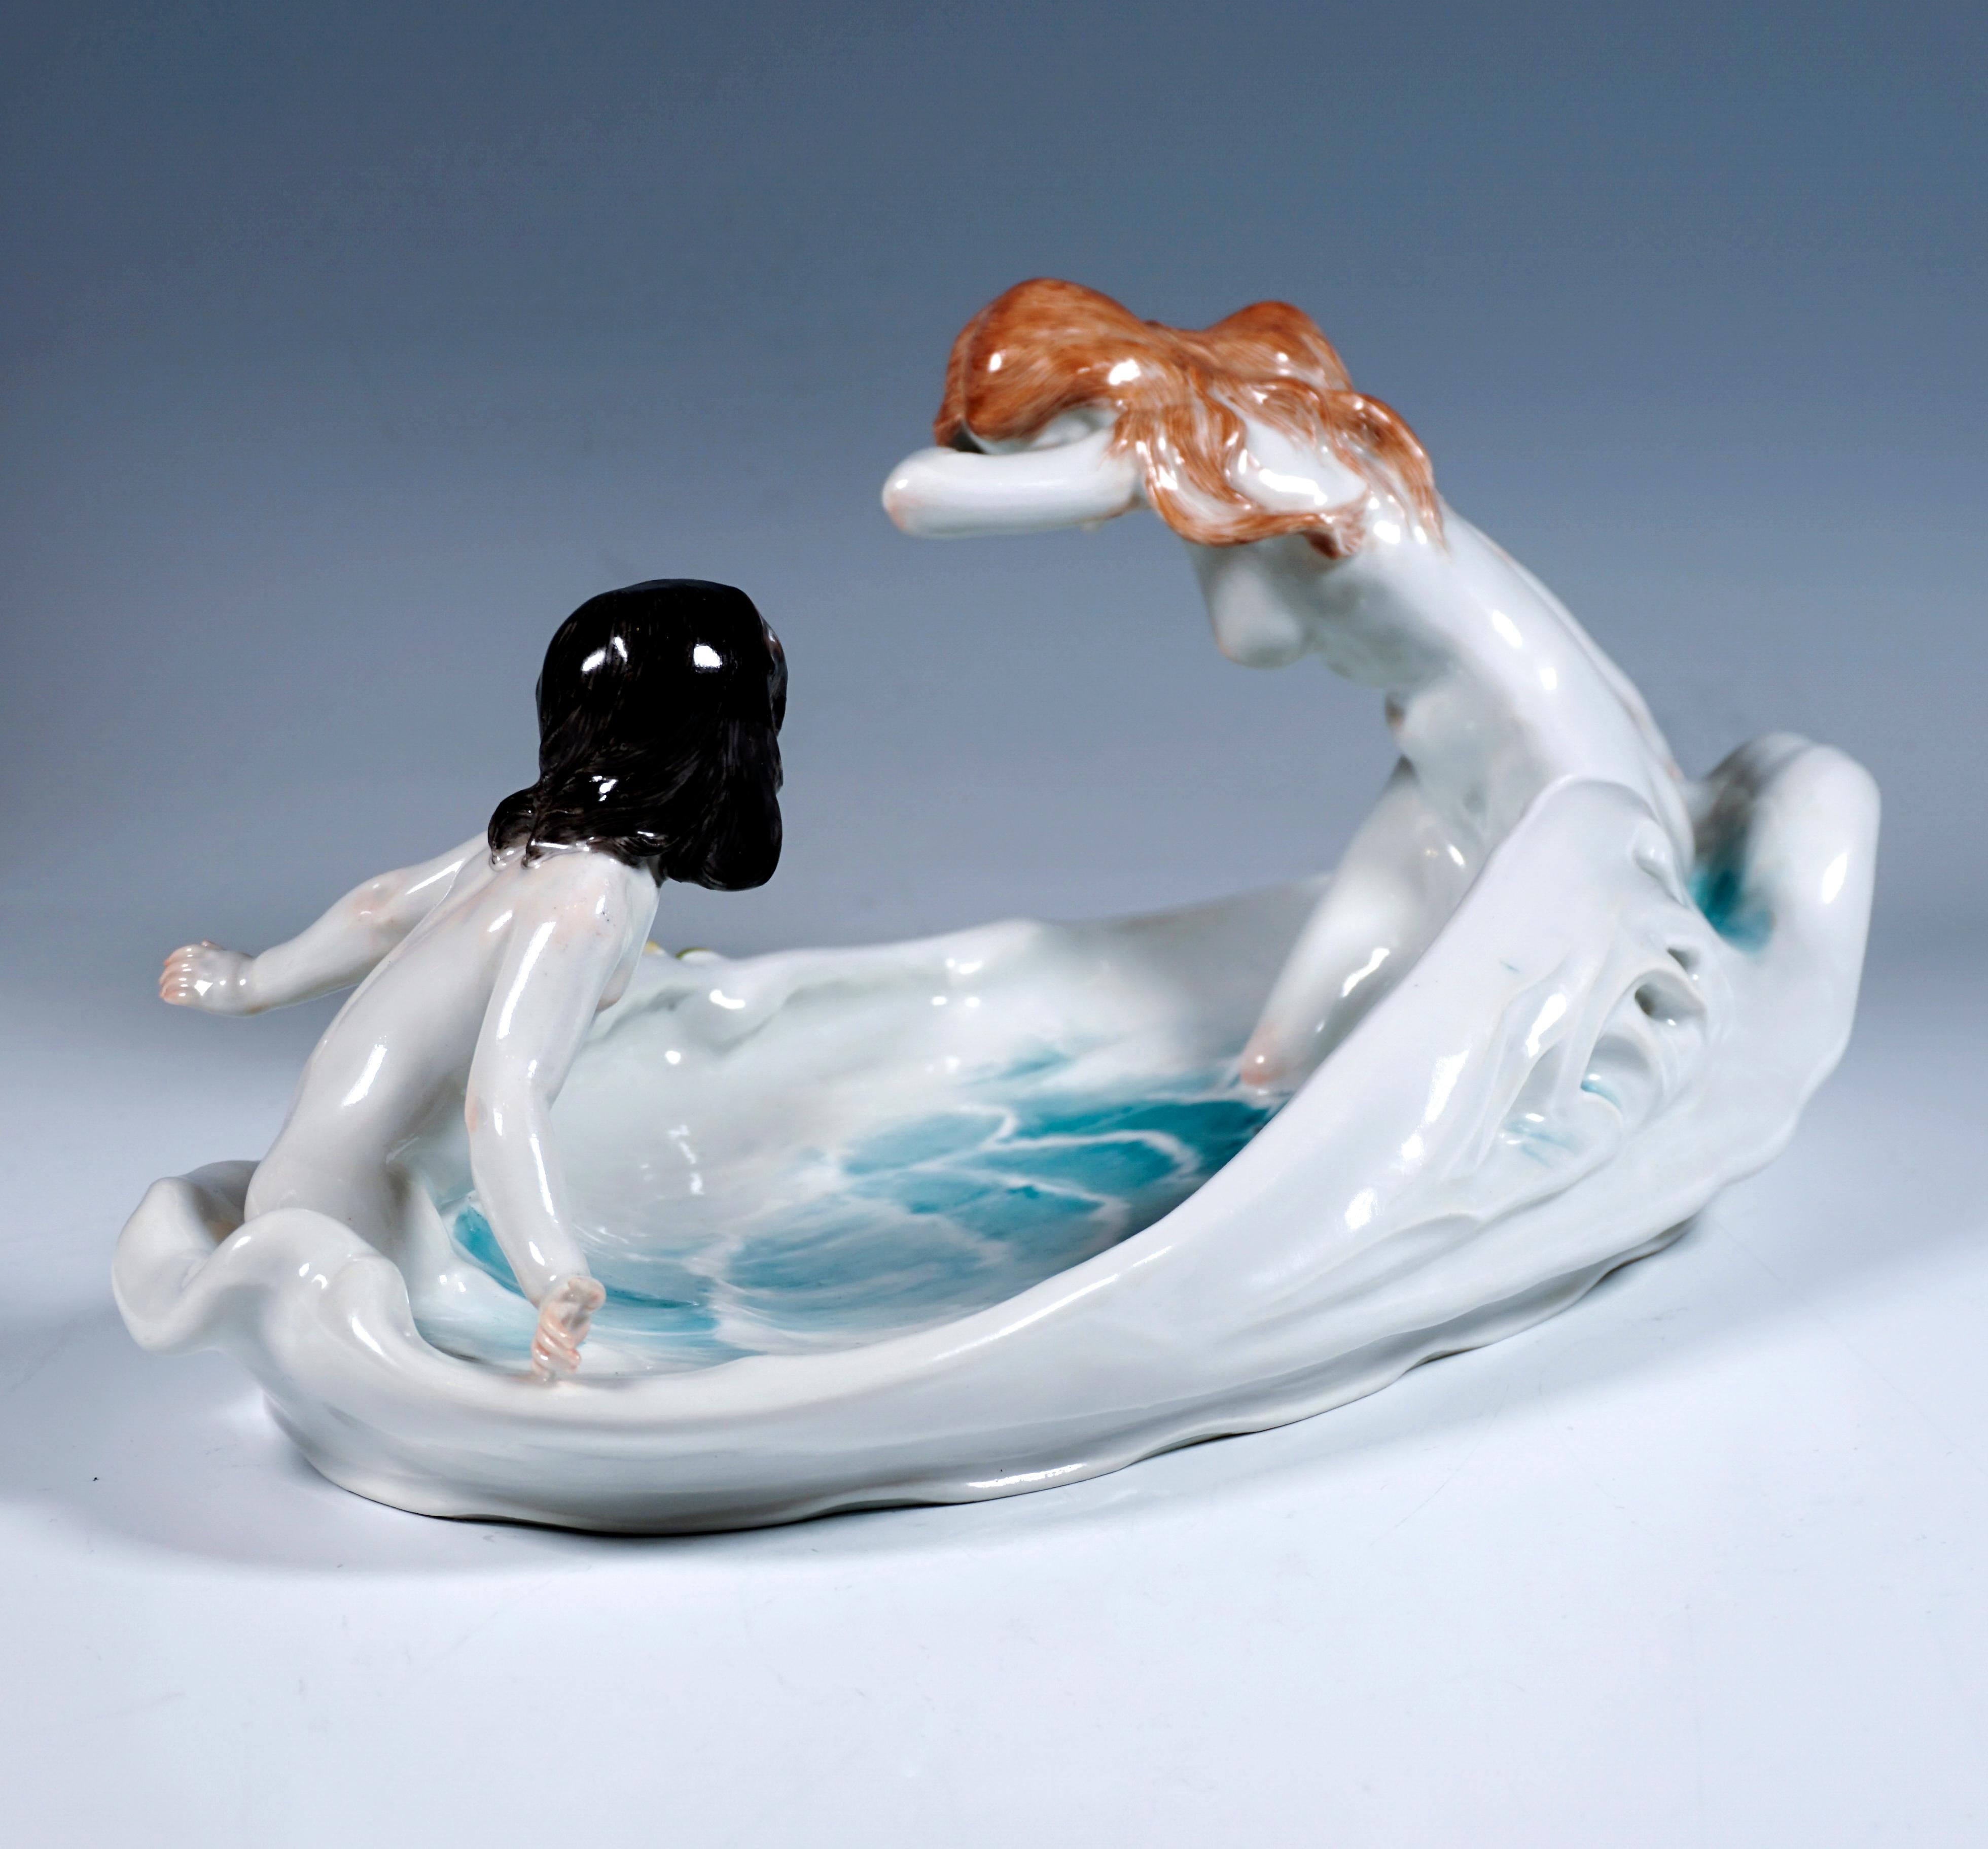 Hand-Crafted Art Nouveau Bowl with Nymph and Girl, by P. Helmig, Meissen Germany, ca 1910 For Sale